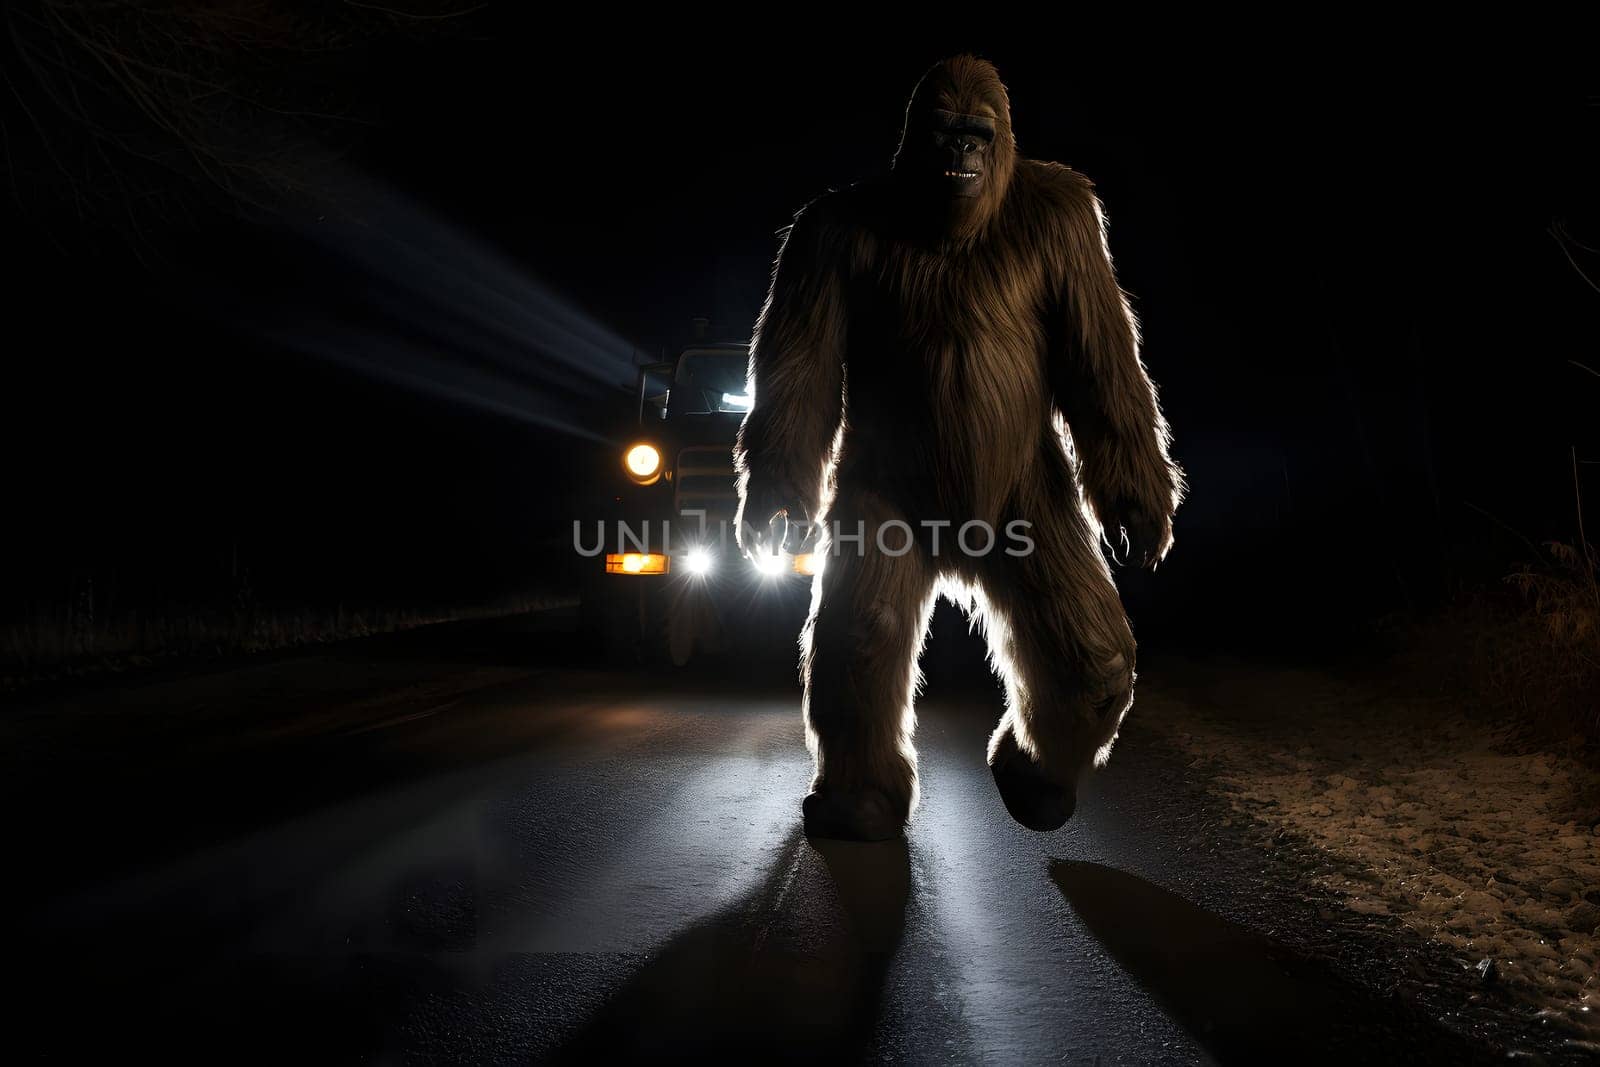 bigfoot running along interstate forest road at night in light of car headlights, neural network generated photorealistic image by z1b